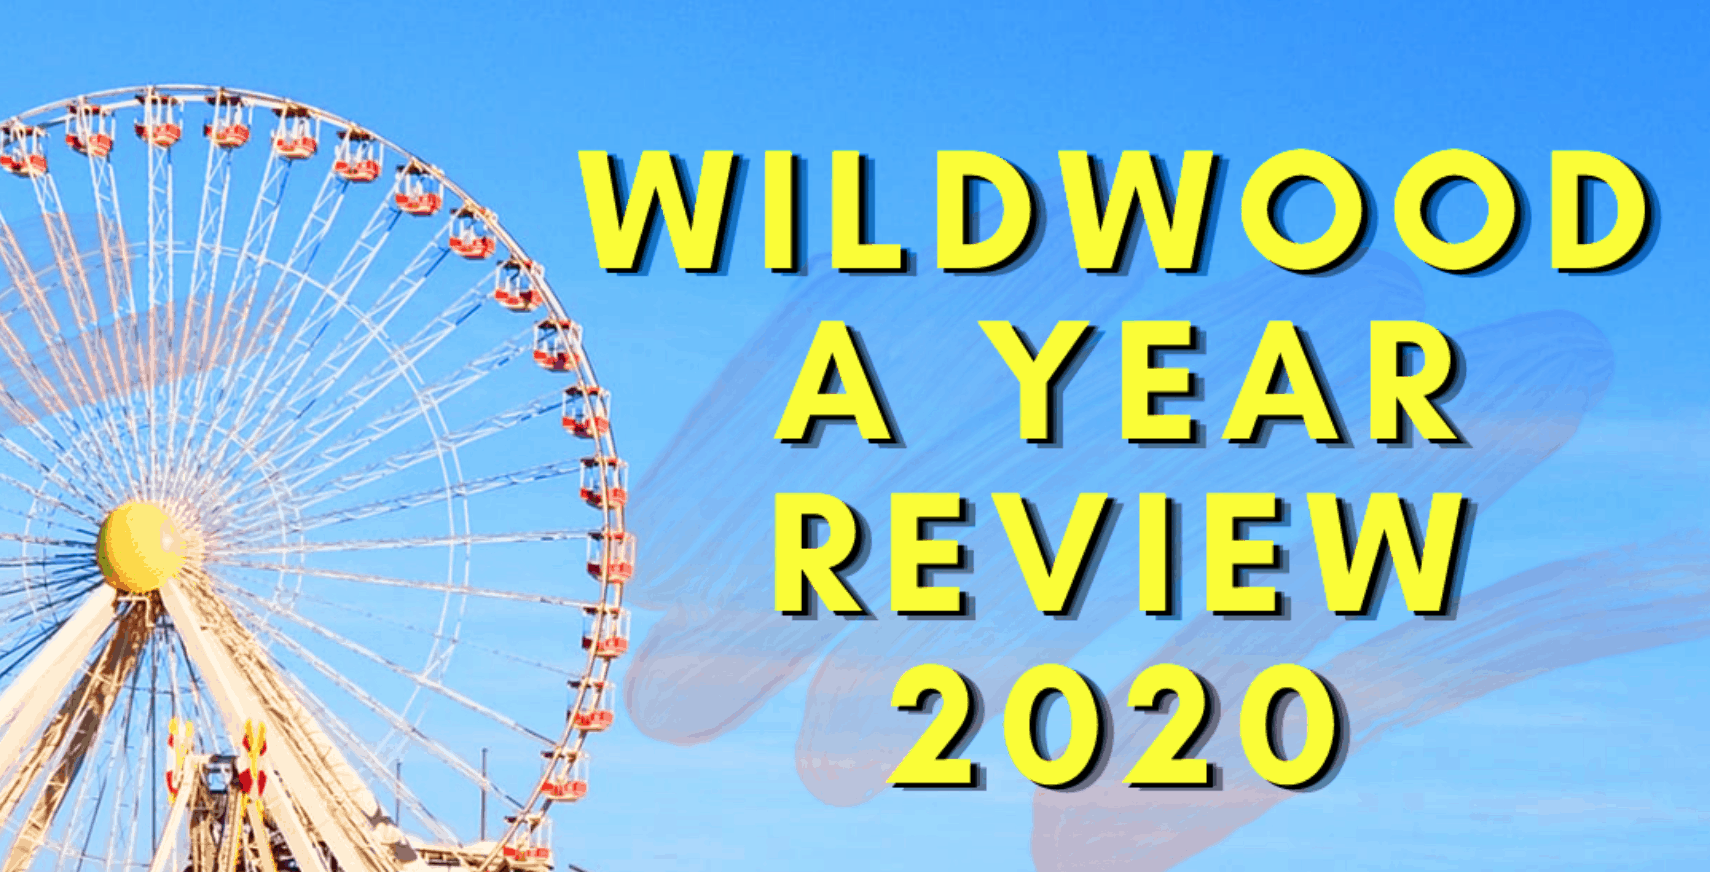 Wildwood 2020 - A Year In Review